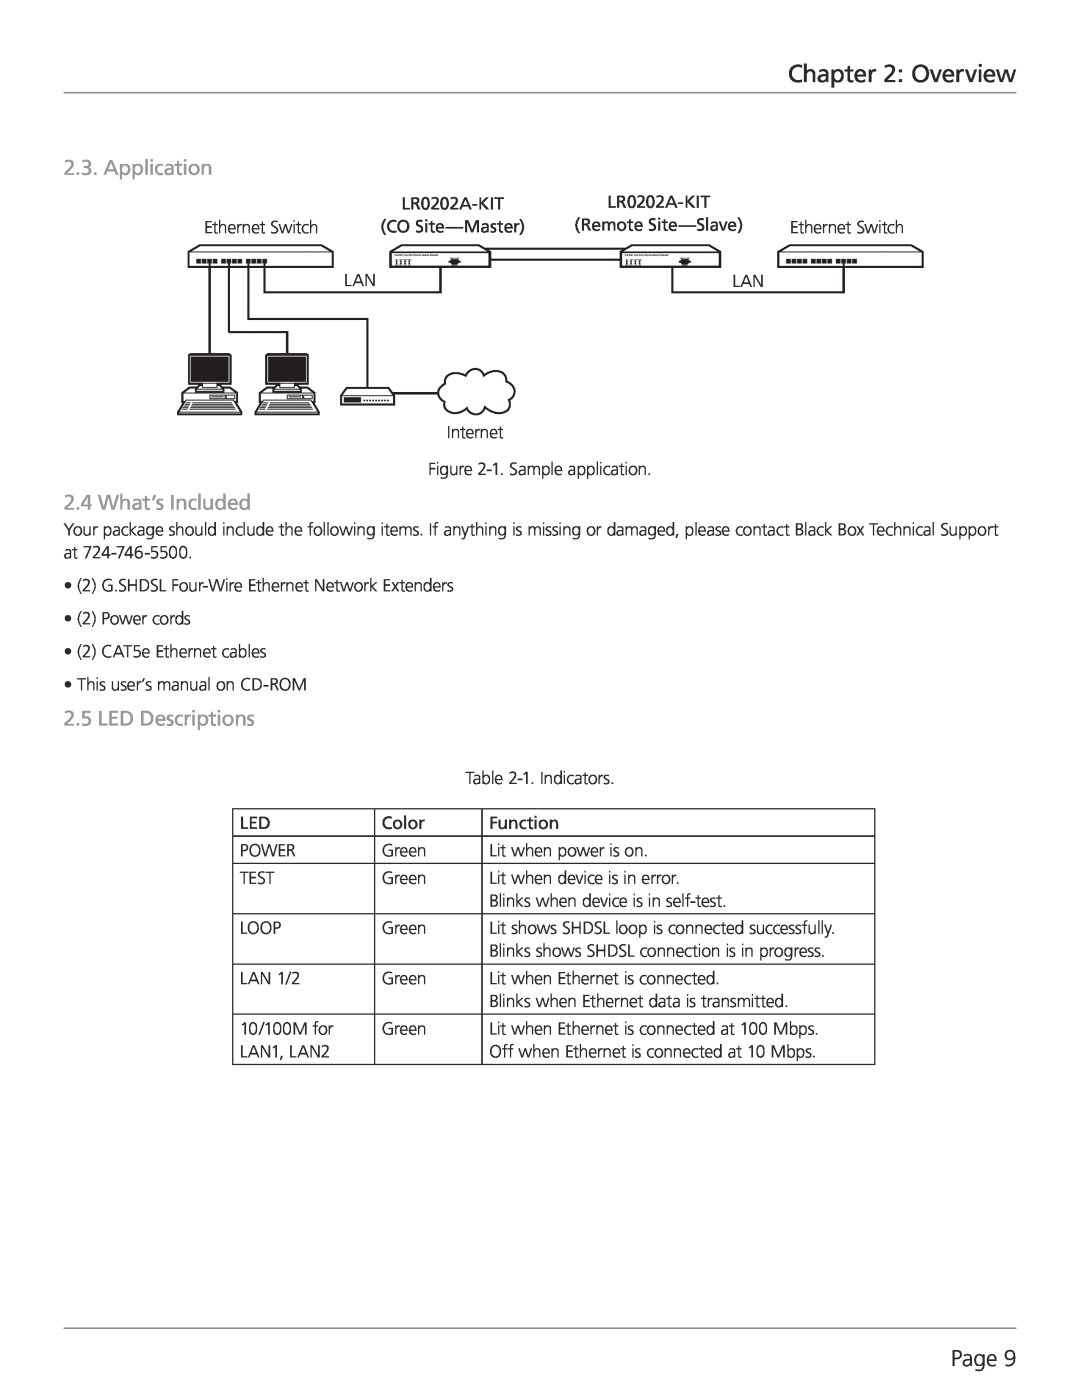 Black Box G.SHDSL Four-Wire Ethernet Network Extender Kit Overview, Page, Application, What’s Included, LED Descriptions 